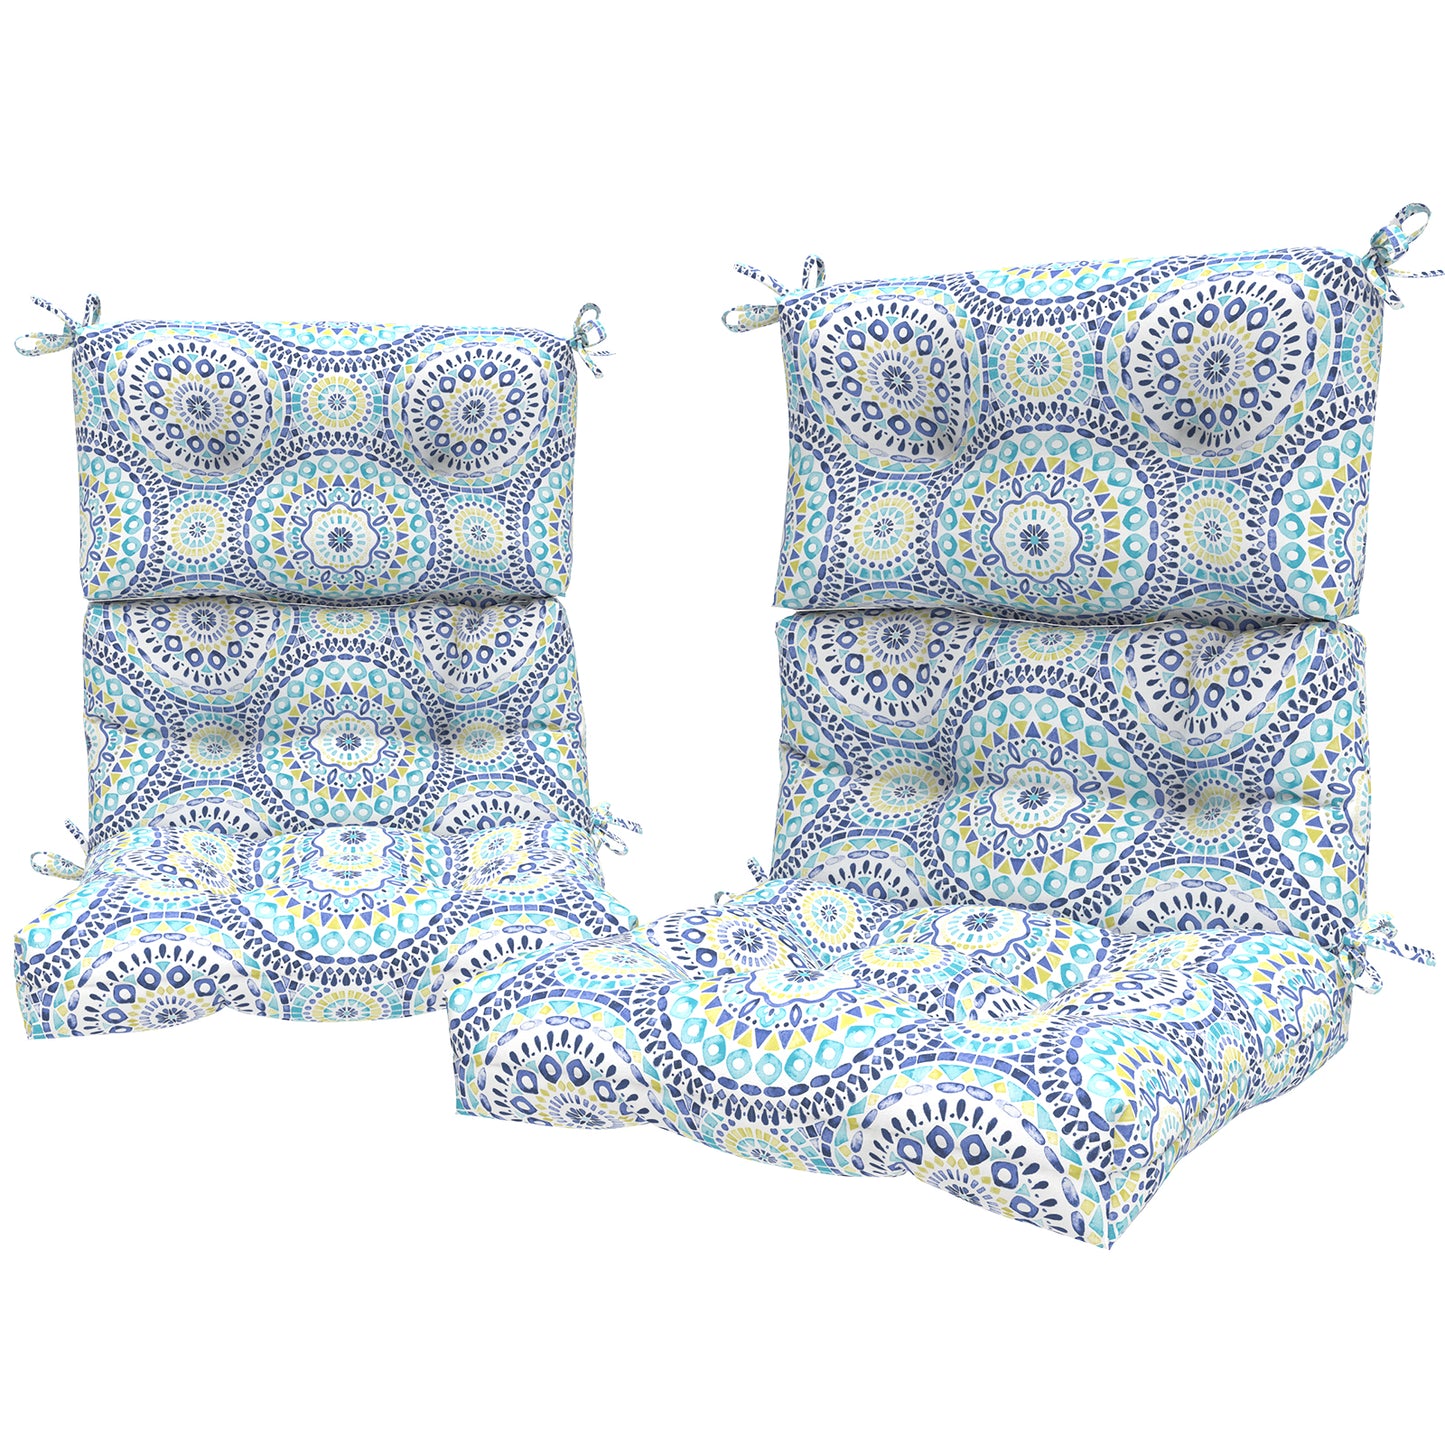 Melody Elephant Outdoor Tufted High Back Chair Cushions, Water Resistant Rocking Seat Chair Cushions 2 Pack, Adirondack Cushions for Patio Home Garden, 22" W x 20" D, Delancey Lagoon